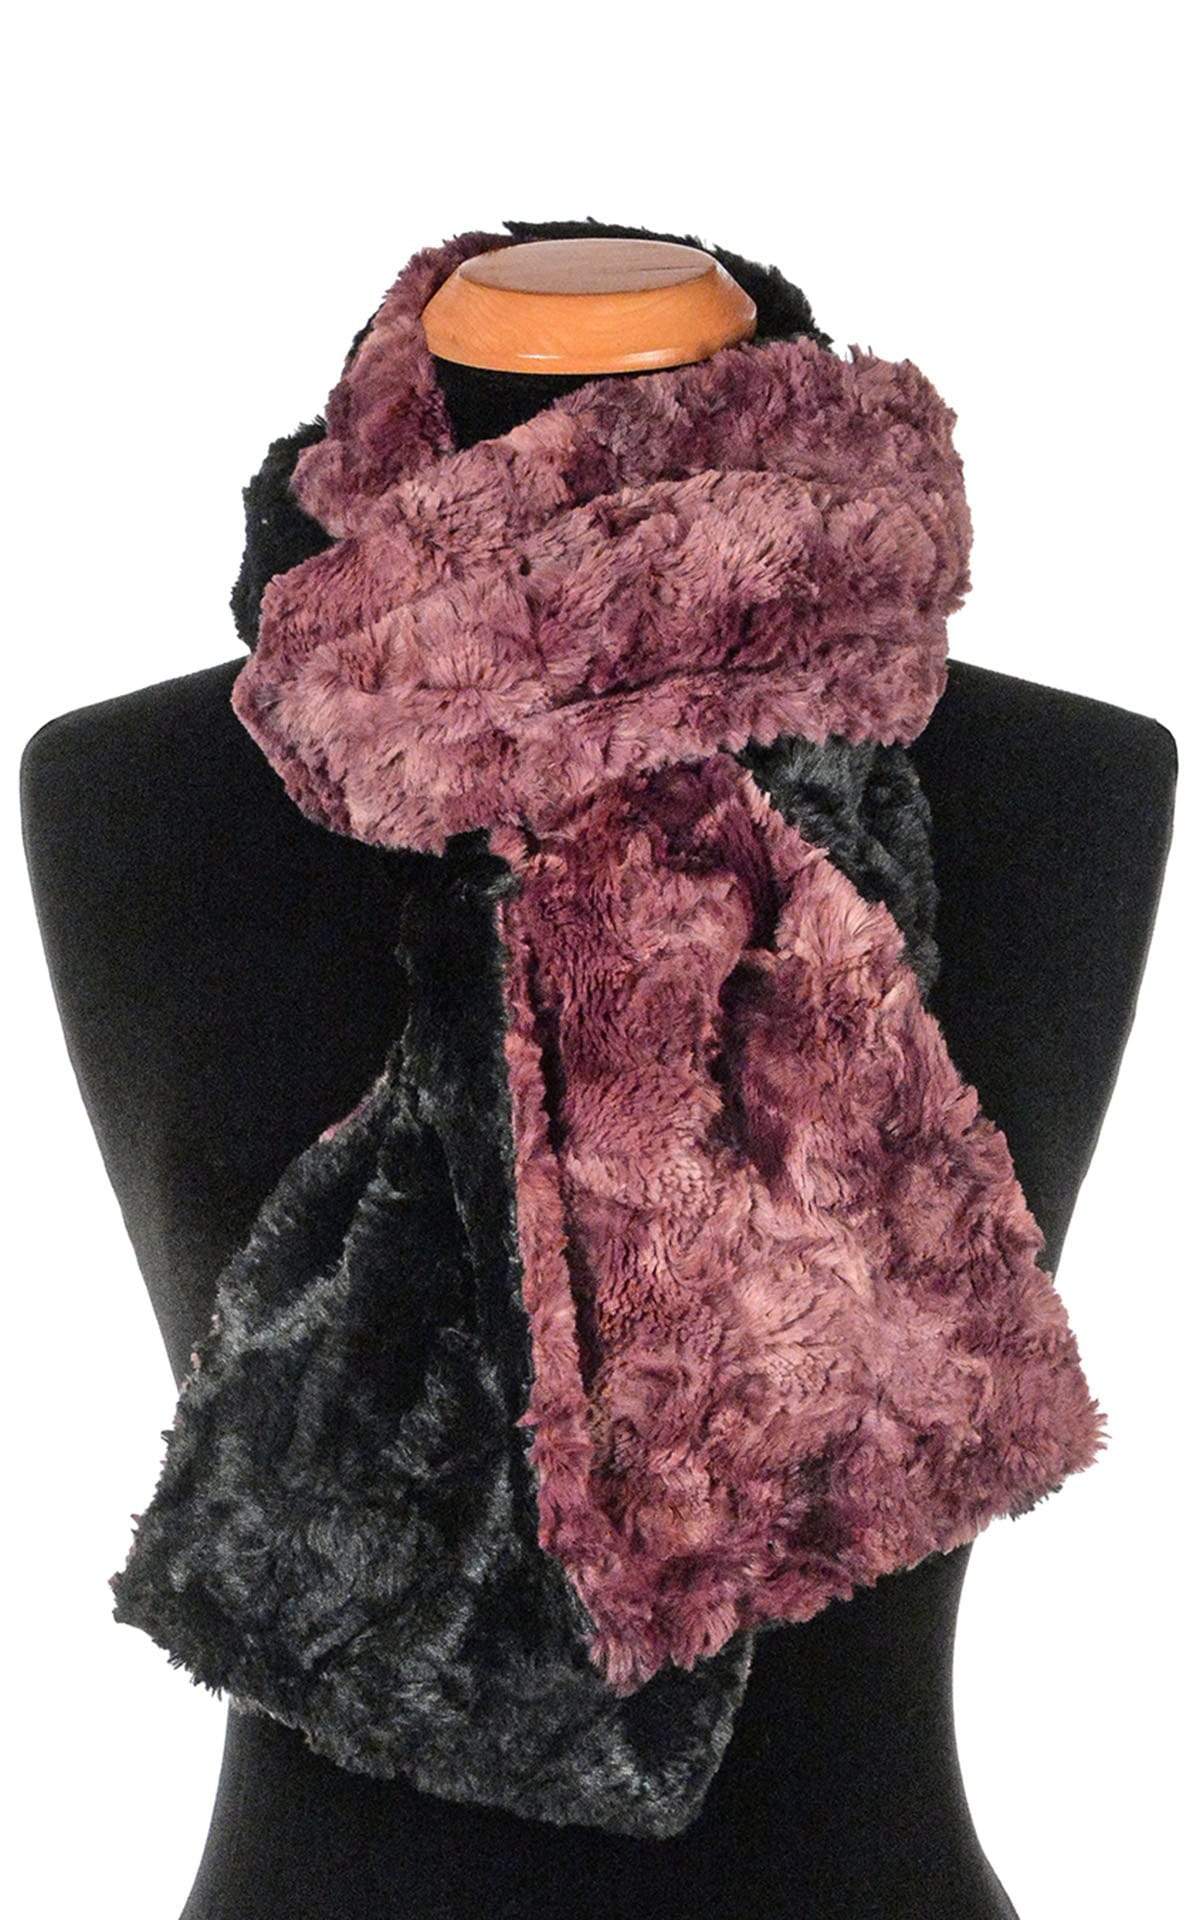 Pandemonium Millinery Classic Scarf - Two-Tone, Luxury Faux Fur in Highland (Meadow - SOLD OUT) Standard / Thistle / Black Scarves Wholesale